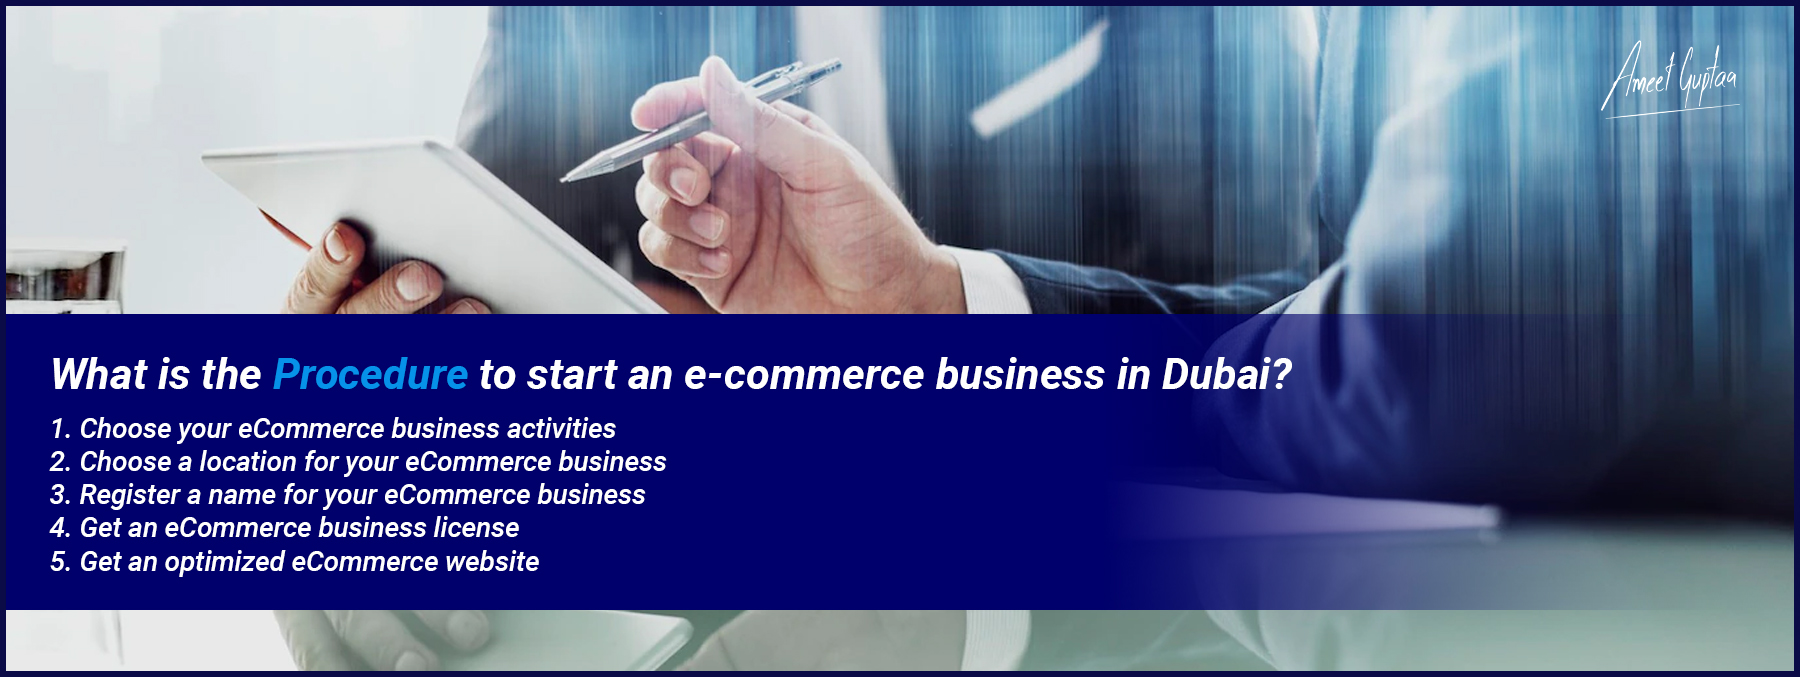 What-is-the-Procedure-to-start-an-e-commerce-business-in-Dubai-AmeetGuptaa